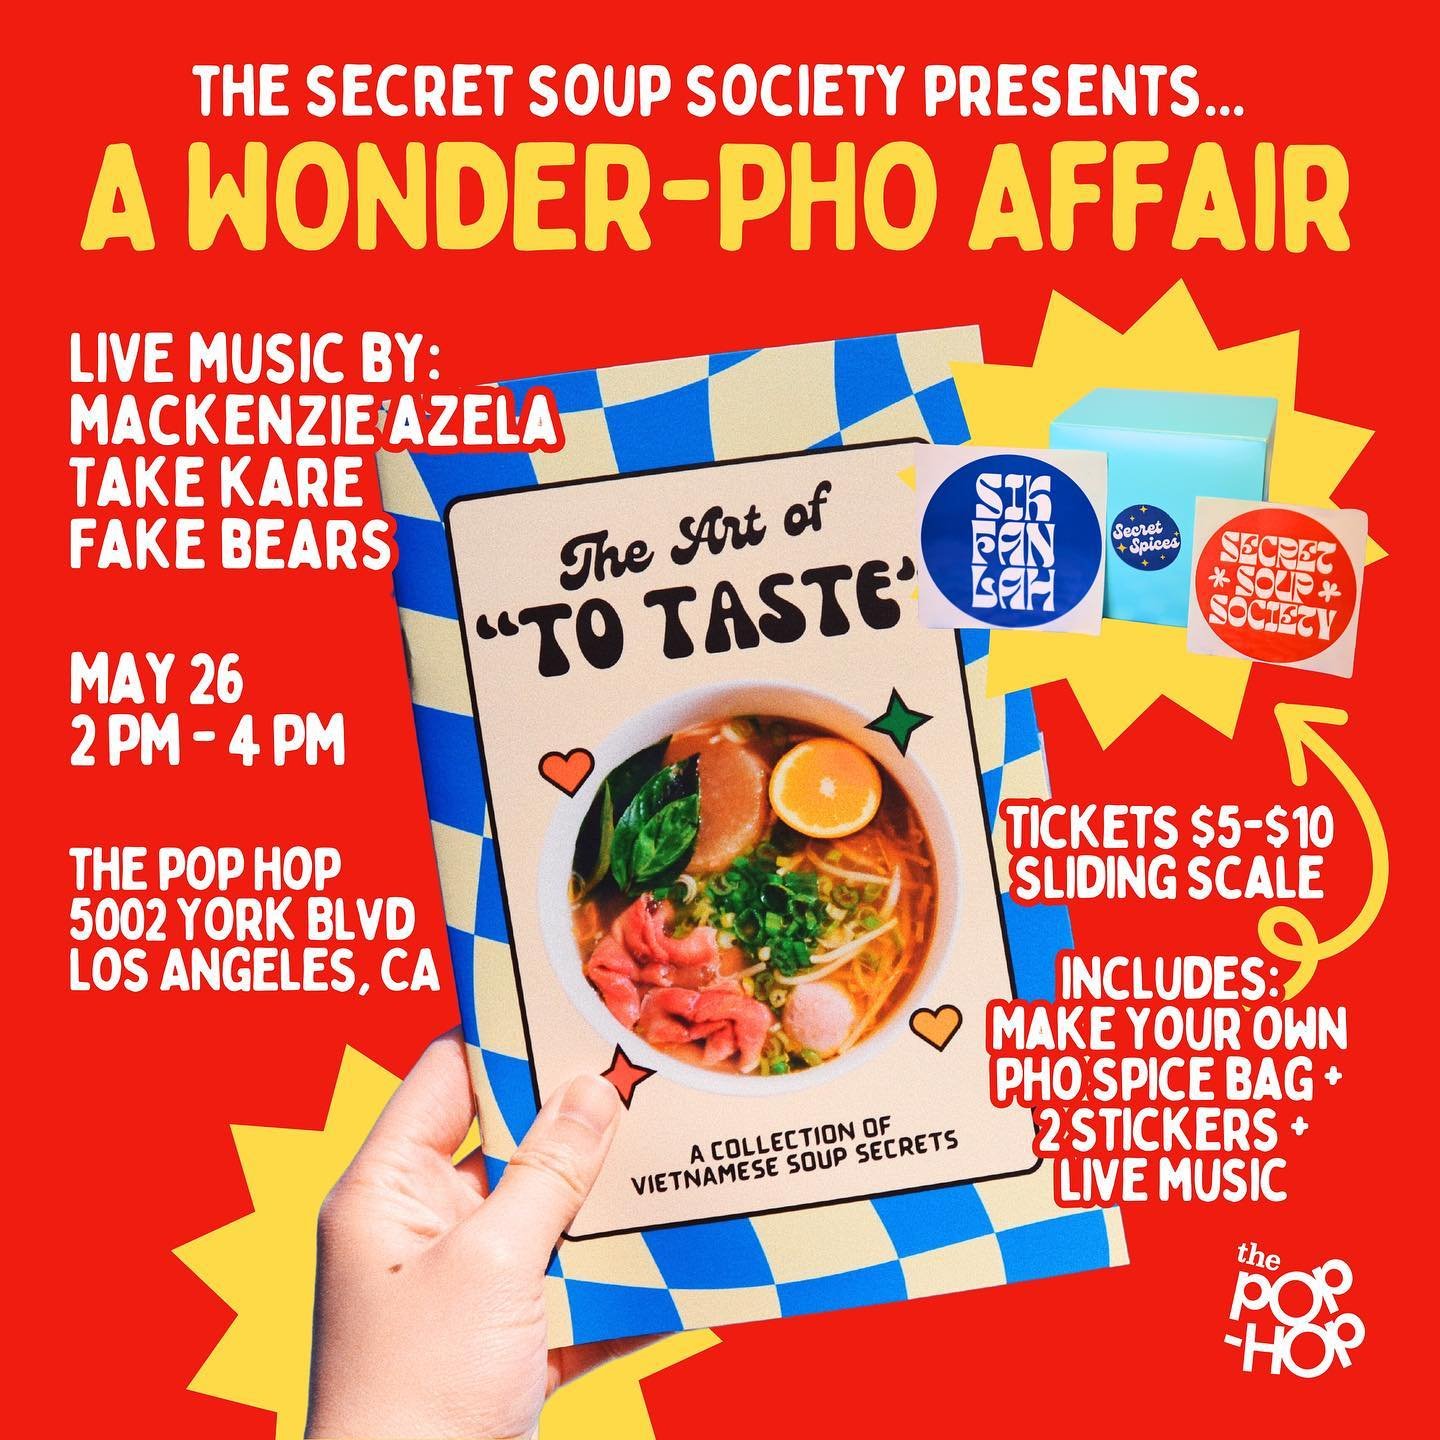 TICKETS IN BIO
Explore the art of taste and sound in this experience centered around live music and recipes! You will unlock Vietnamese soup secrets as you build your own spice bag to take home and make a simple and delicious Phở. There will be pho-n